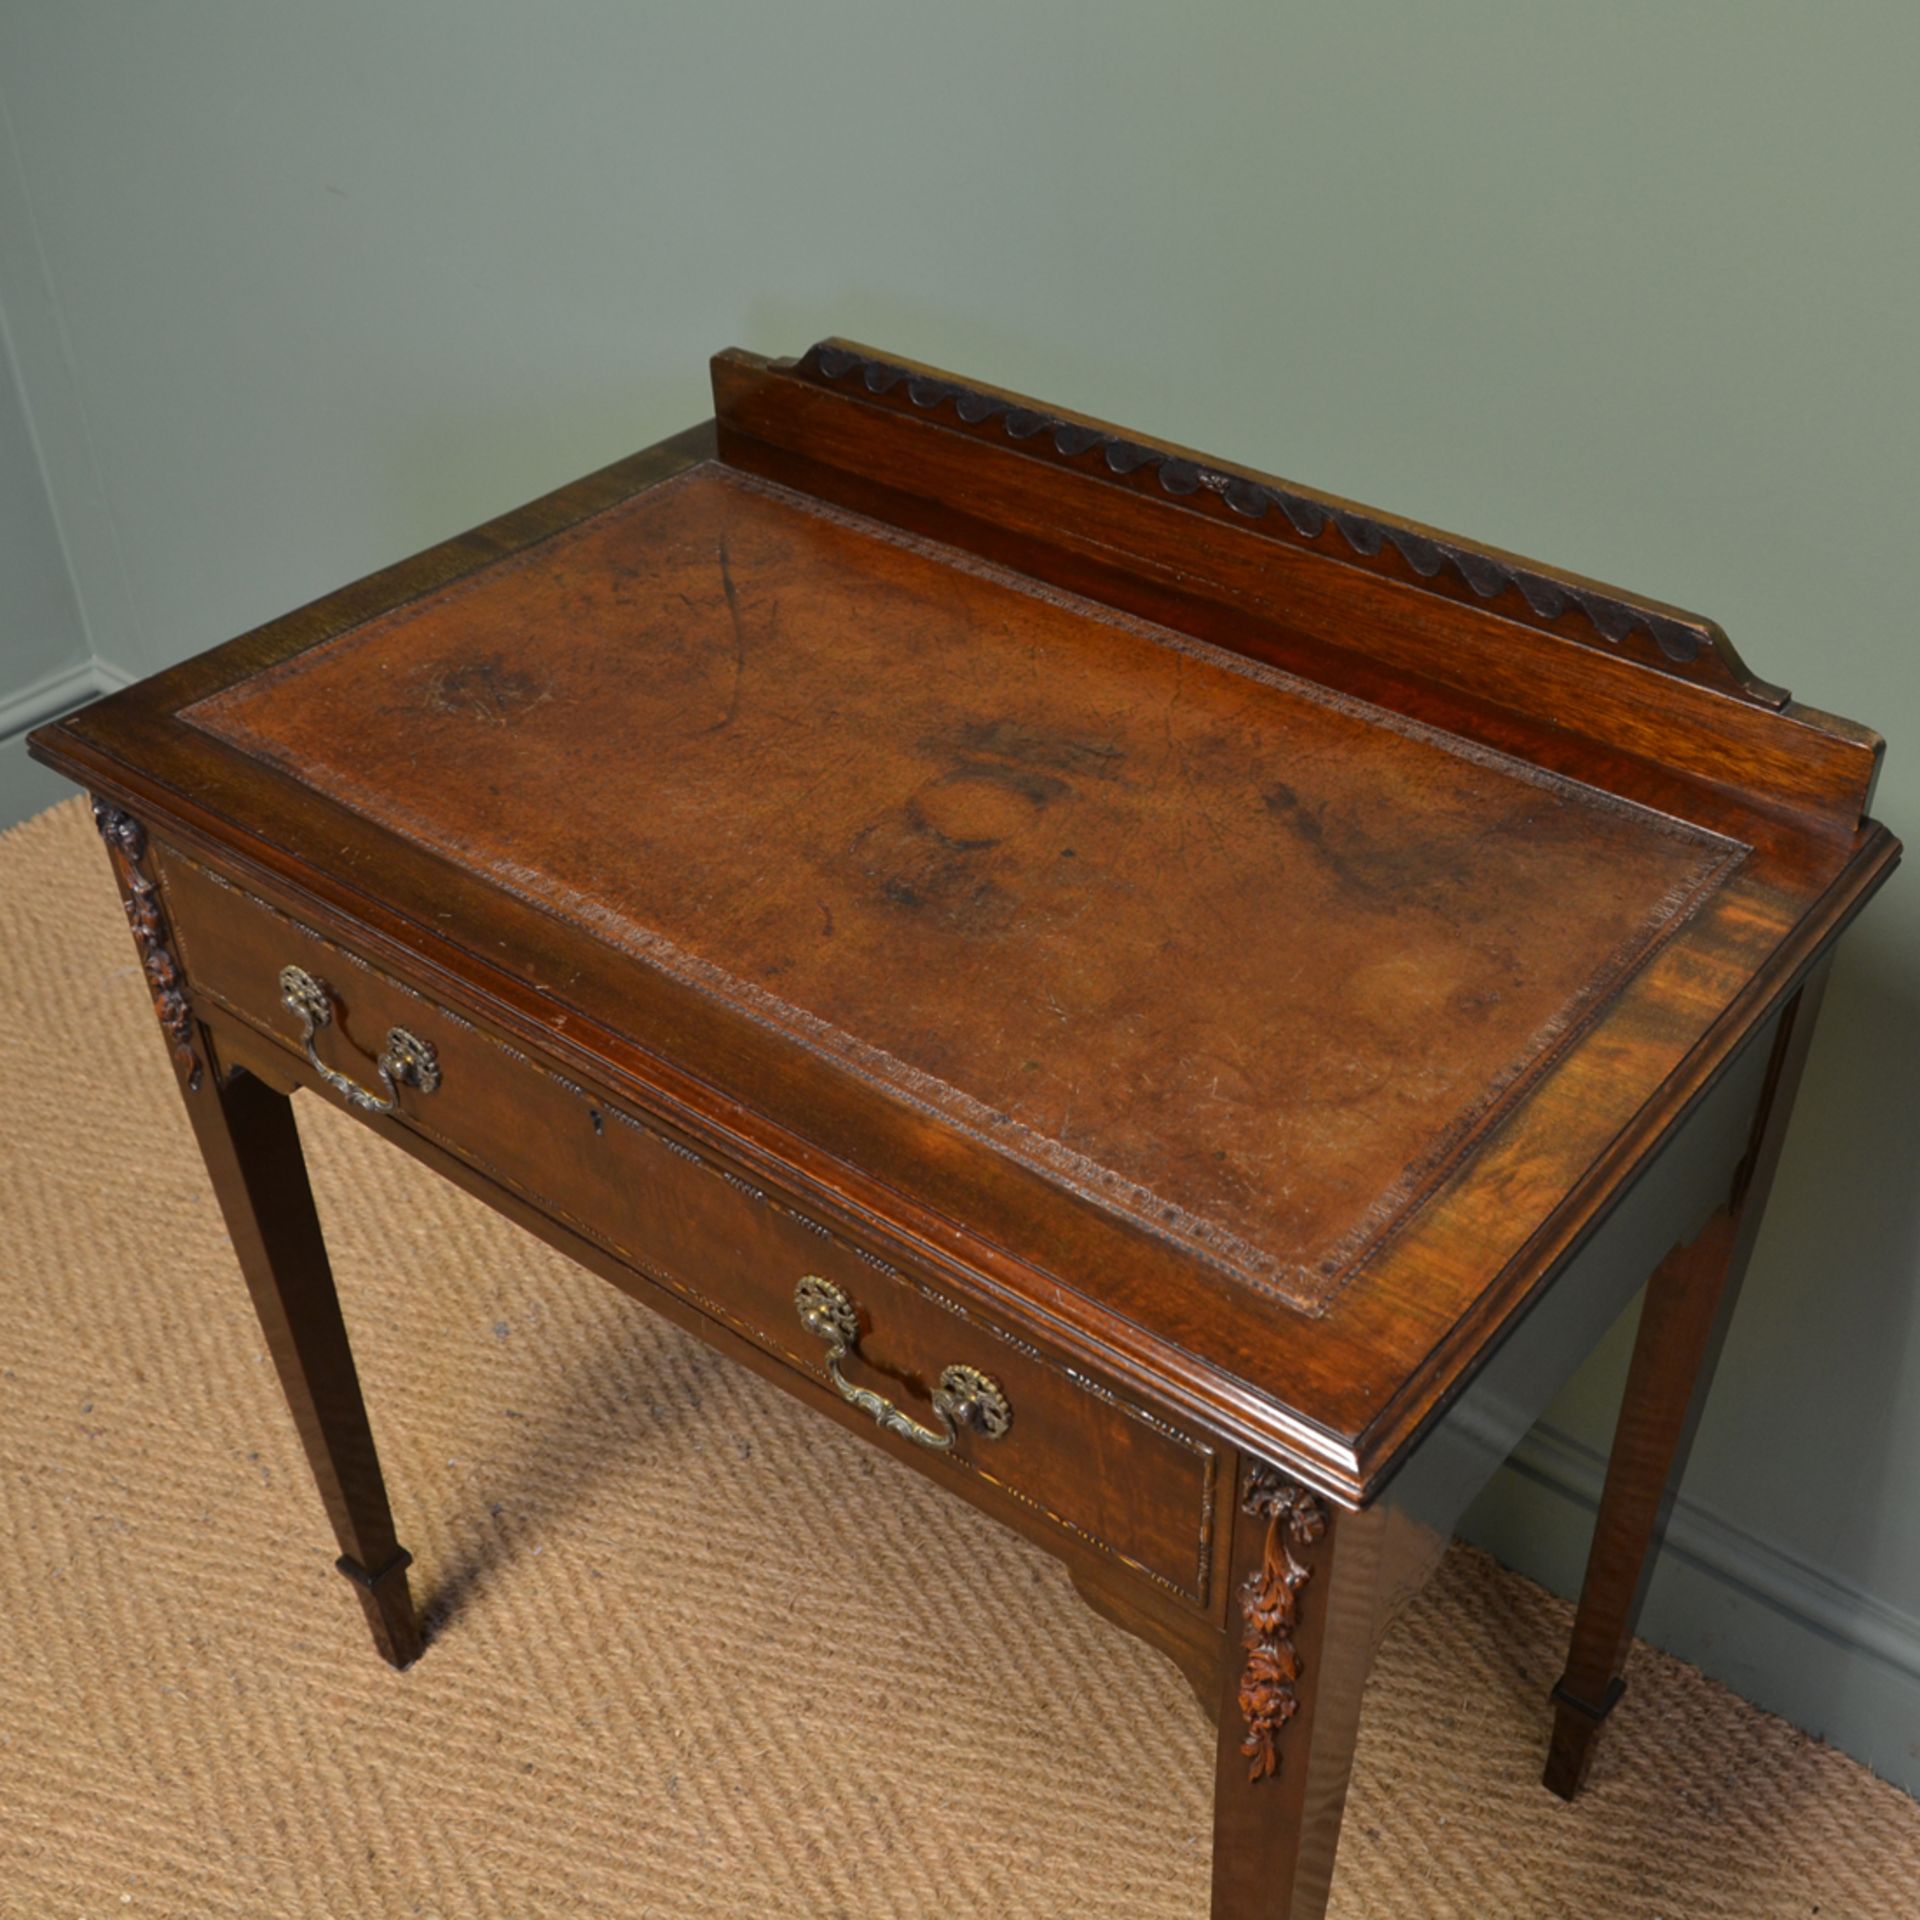 Quality Warring and Gillows Antique Edwardian Writing Table - Image 7 of 10